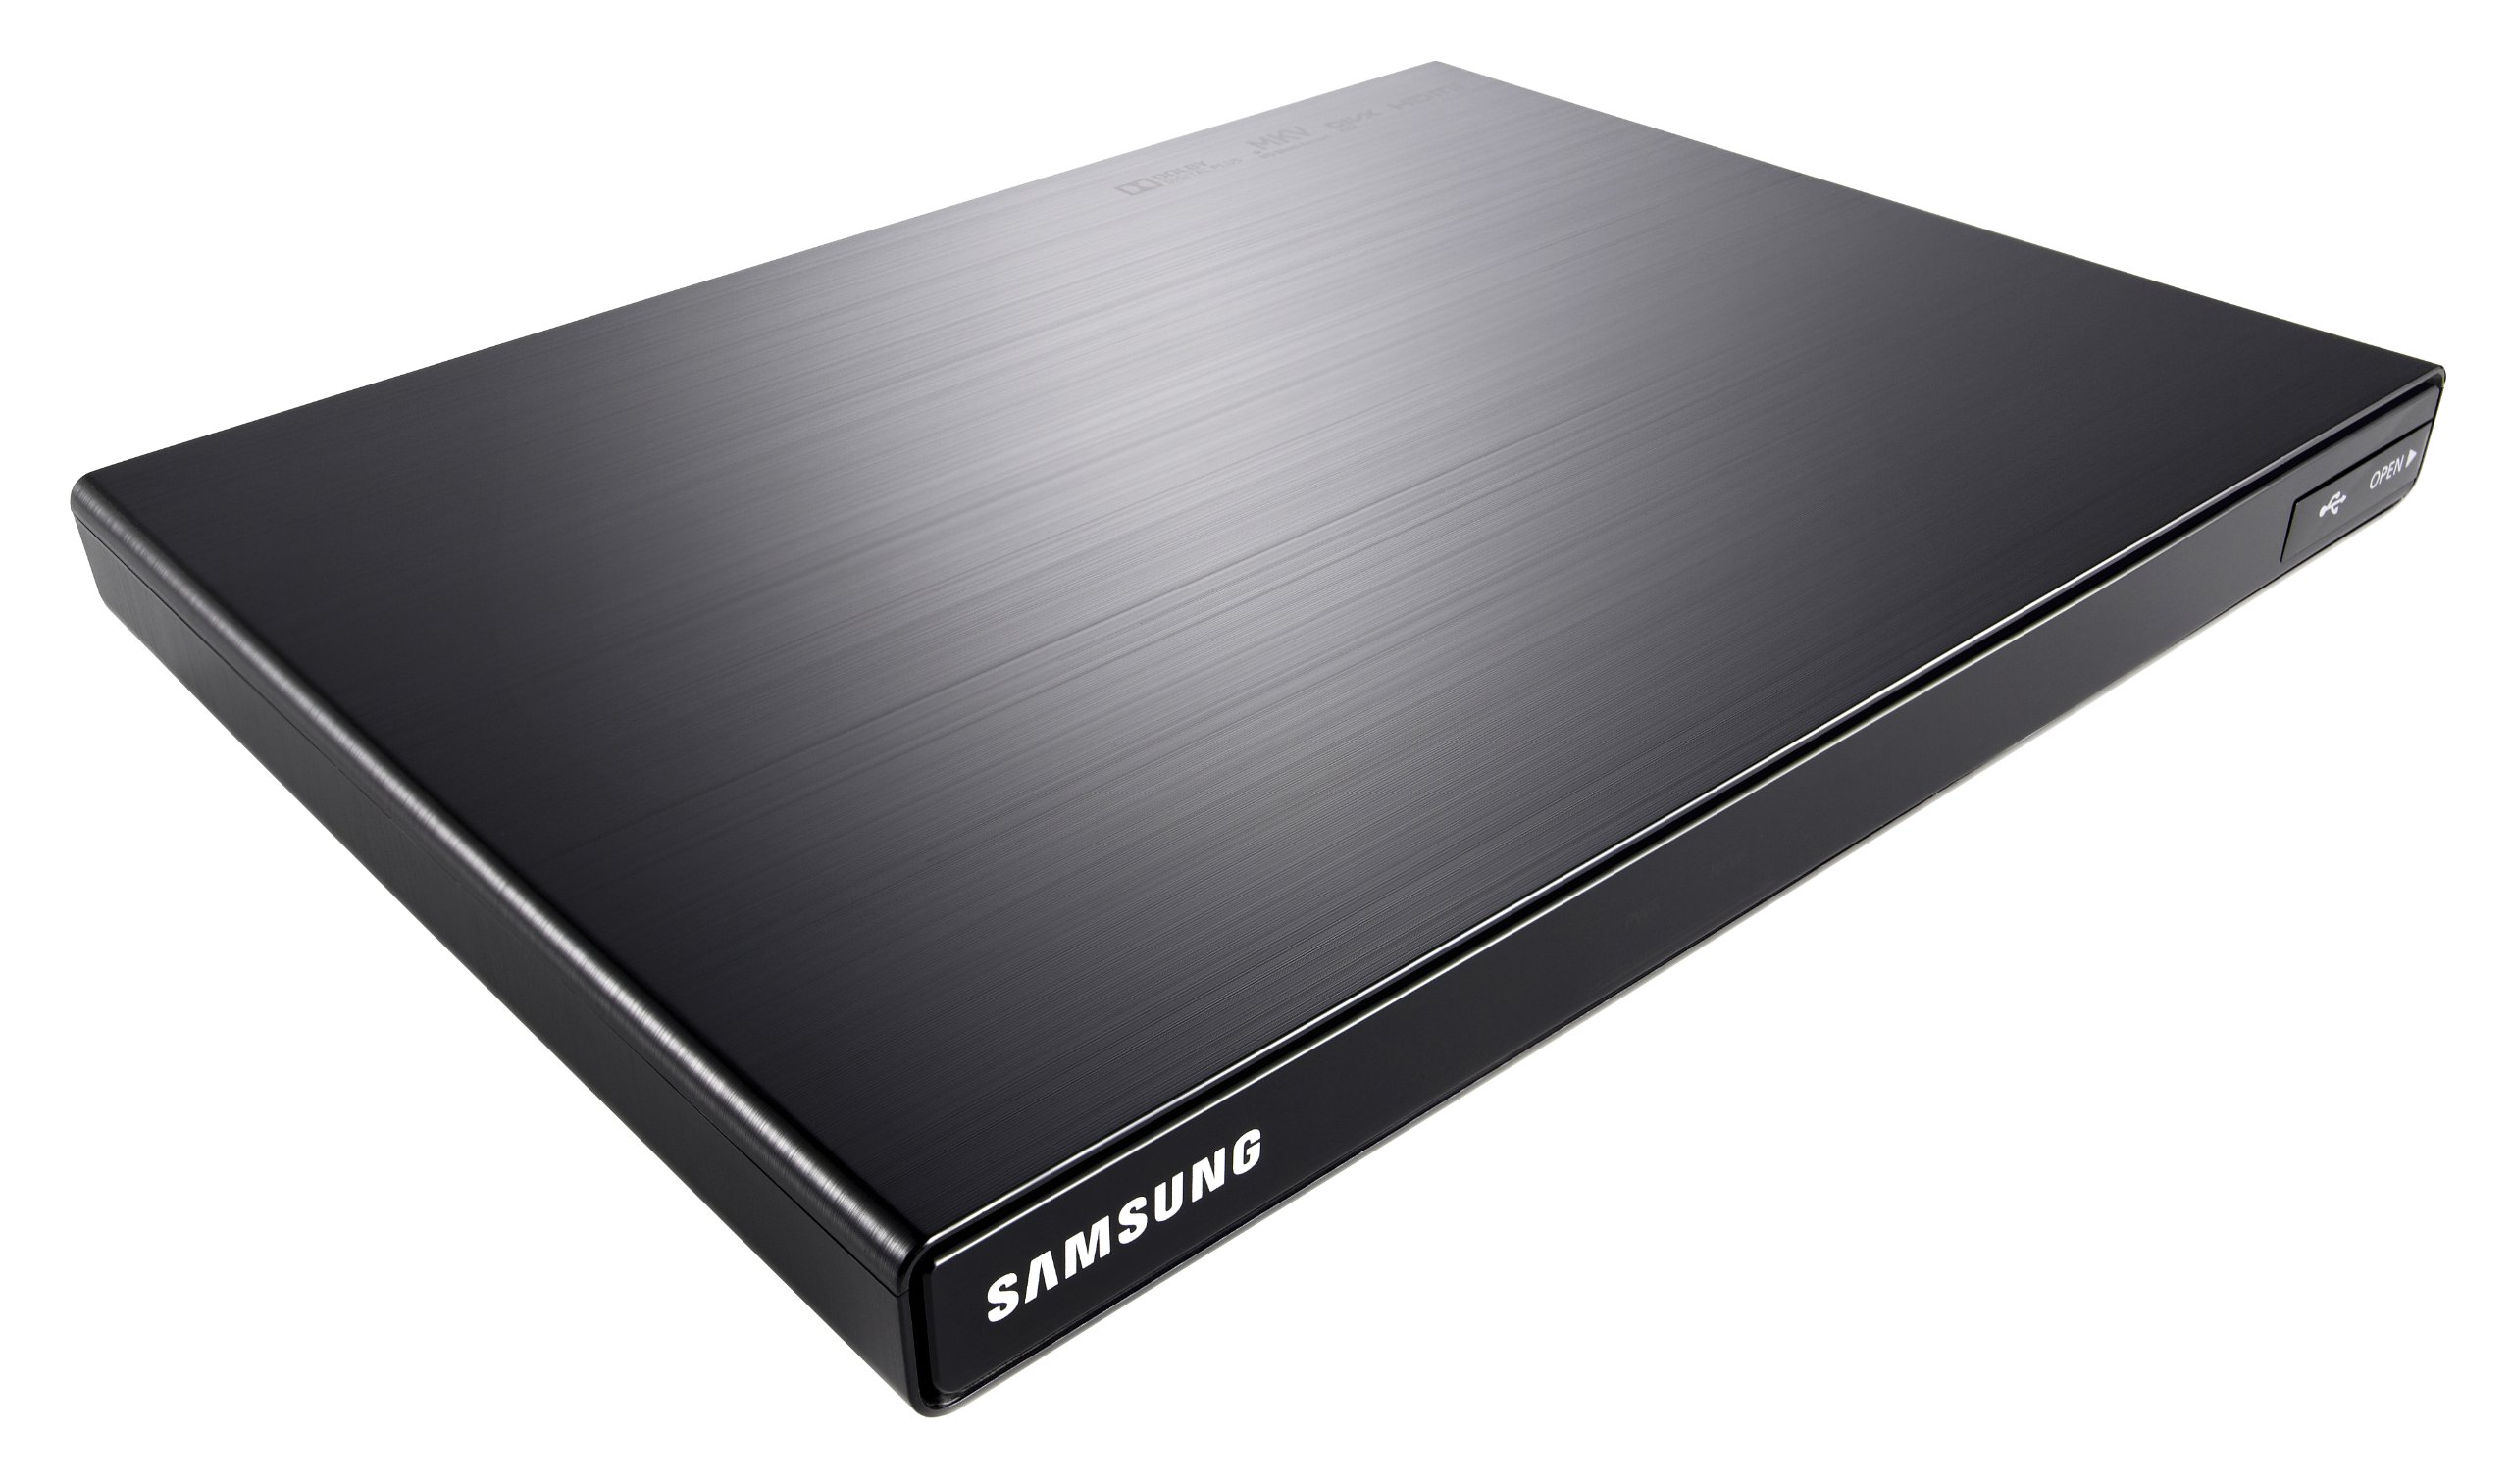 Samsung GX-SM530CF Cable Box and Streaming Media Player with Built-In Wi-Fi (2013 Model)